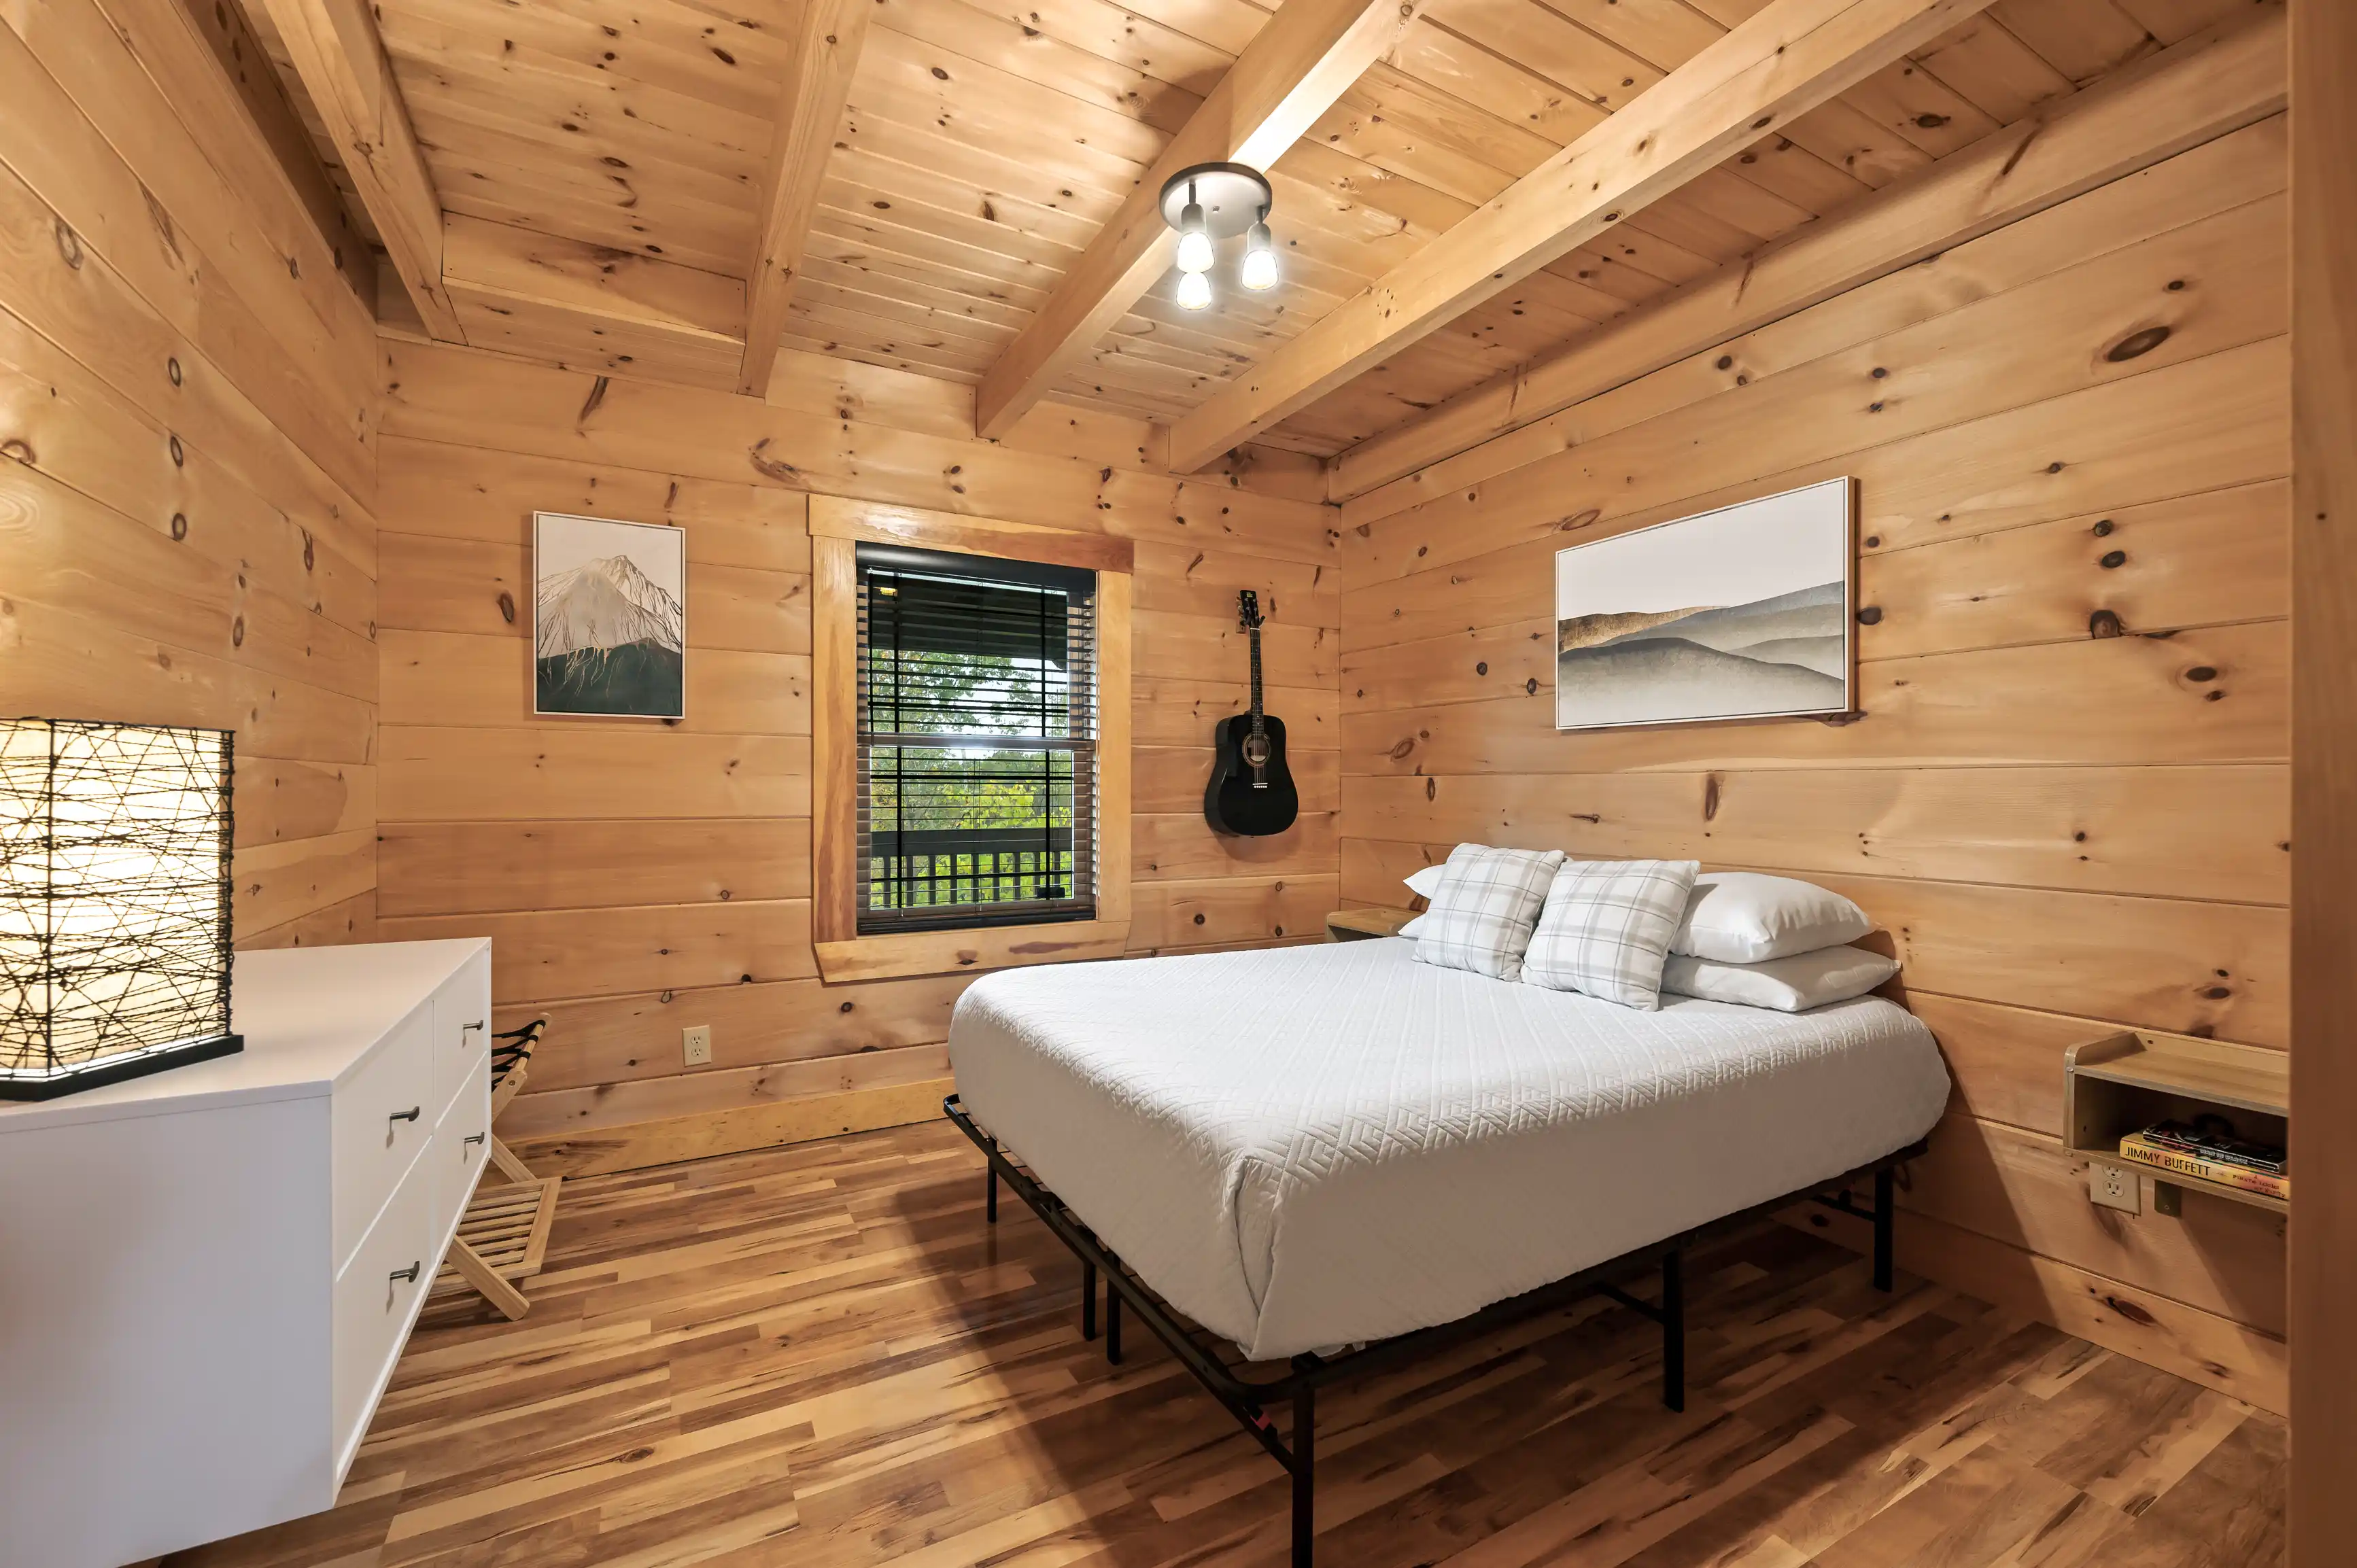 Cozy cabin bedroom interior with wooden walls and ceiling, queen-sized bed, framed artwork, wall-mounted guitar, and window with nature view.